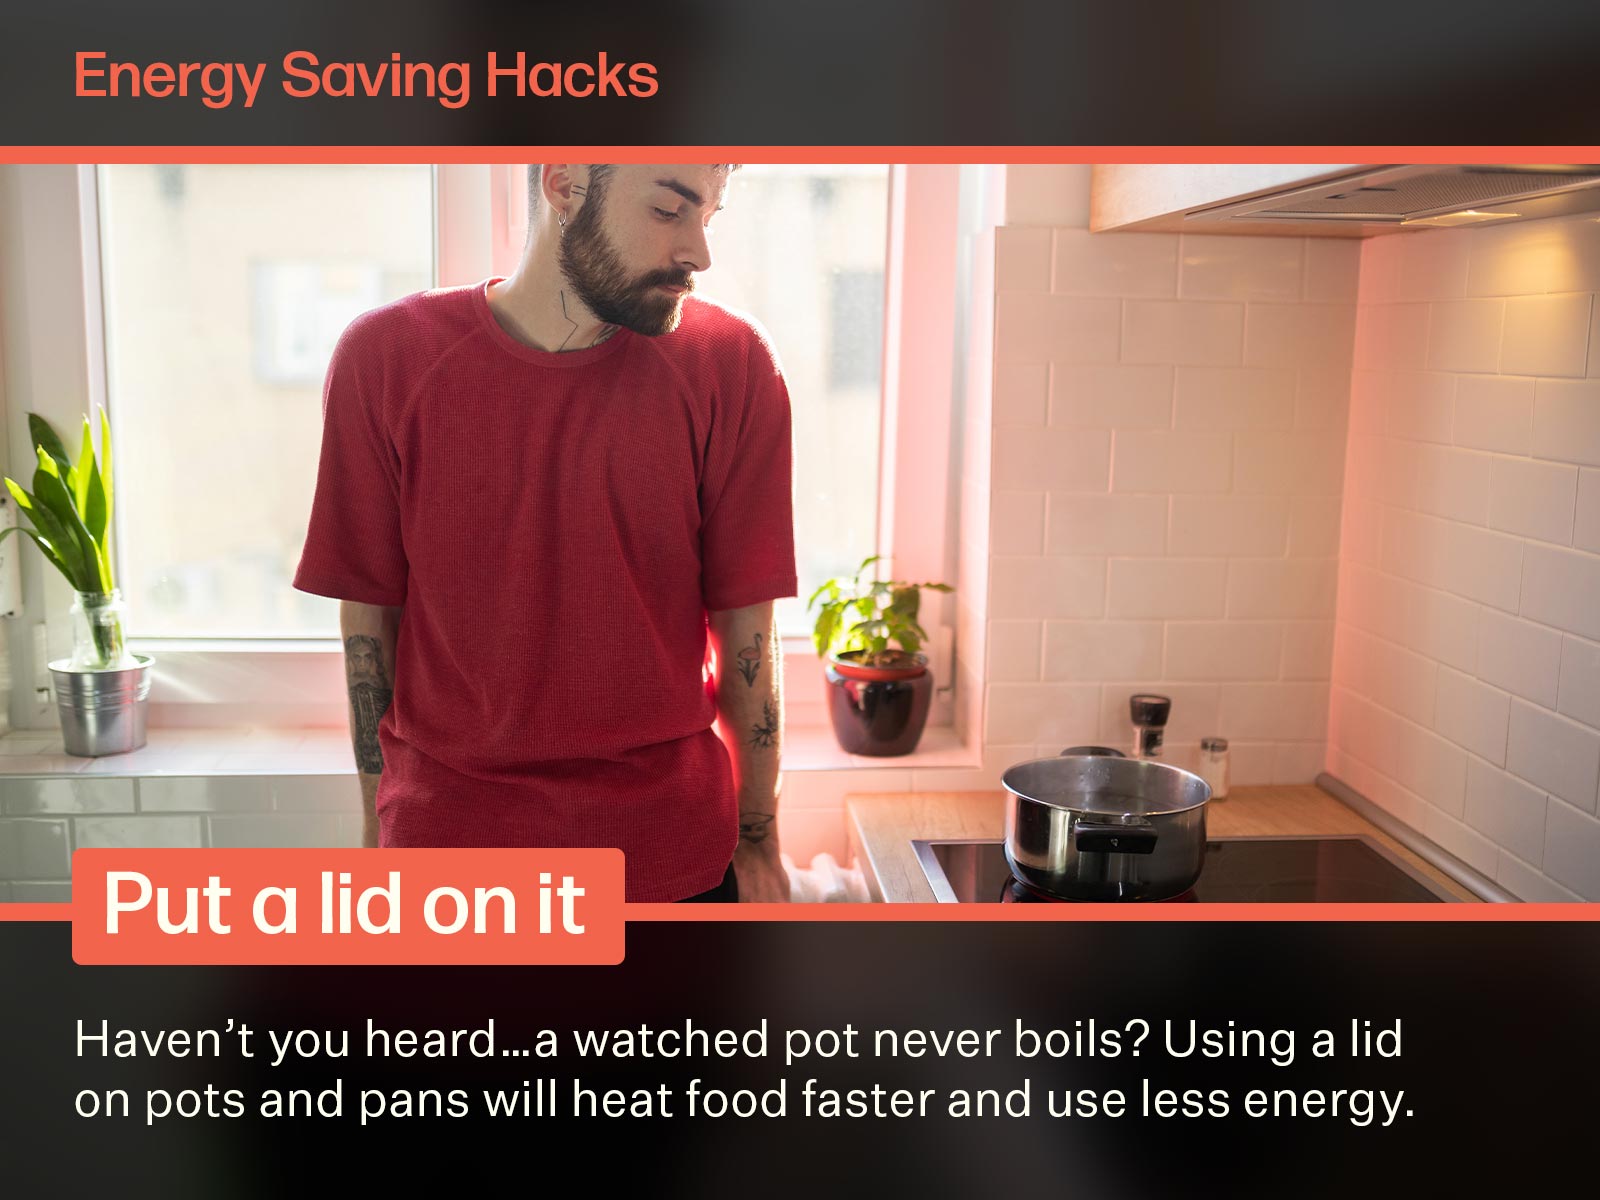 A young man taking a look at a pot of boiling water. If he were to put a lid on the pot, it would make for a more efficient use of energy. Text on image says: Energy Saving Hacks. Put a lid on it. Haven't you heard...a watched pot never boils? Using a lid on pots and pans will heat food faster and use less energy.